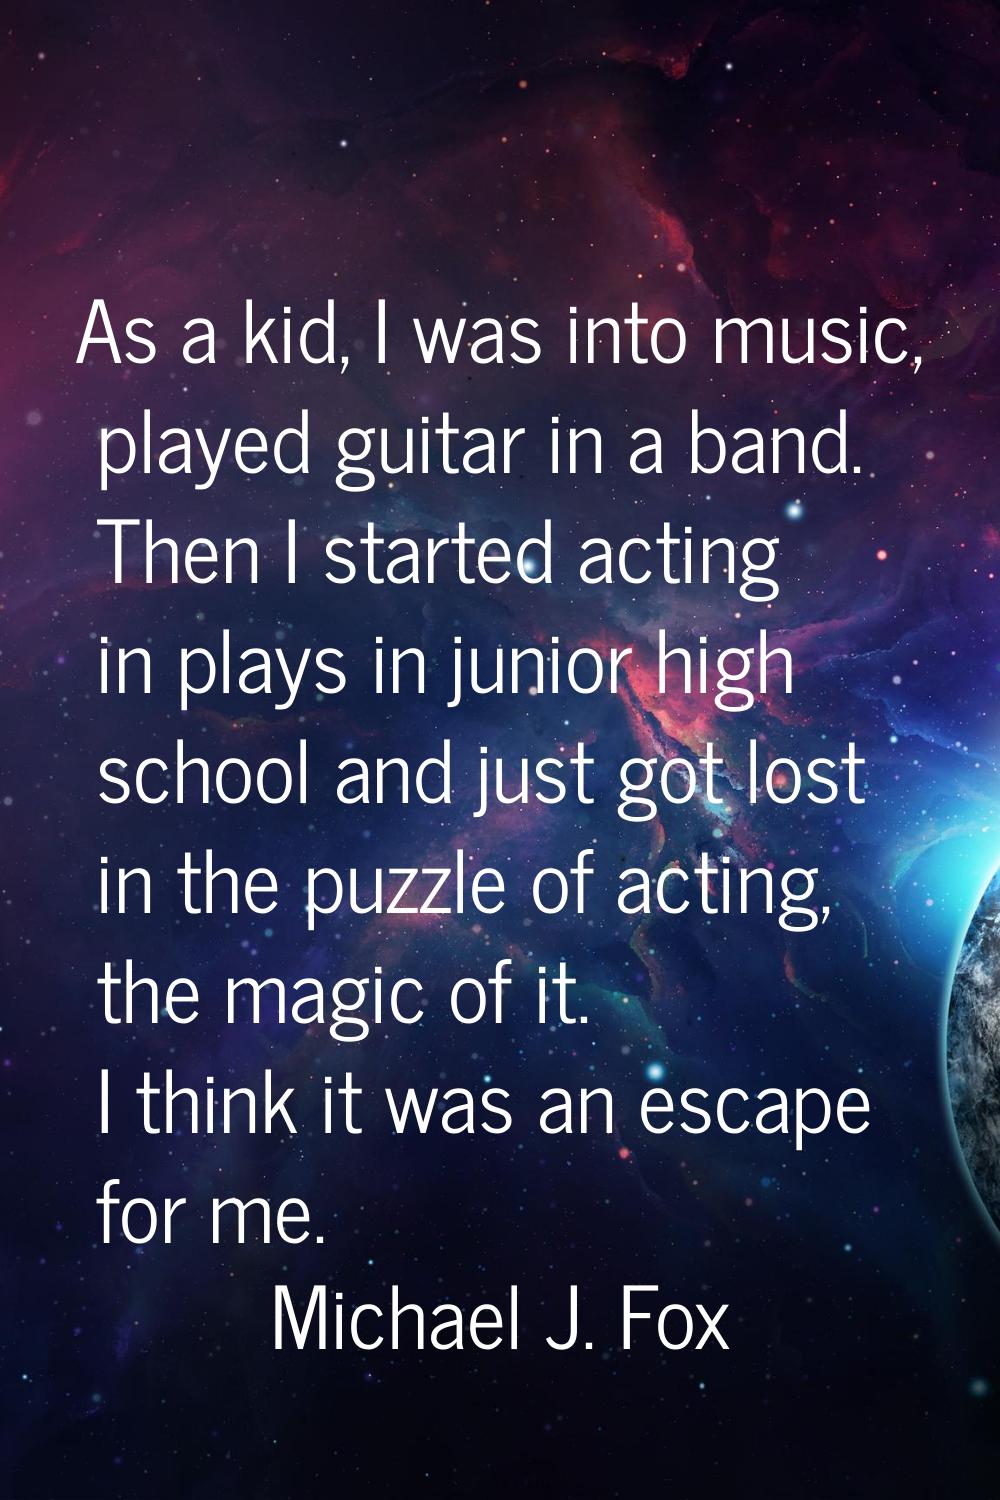 As a kid, I was into music, played guitar in a band. Then I started acting in plays in junior high 